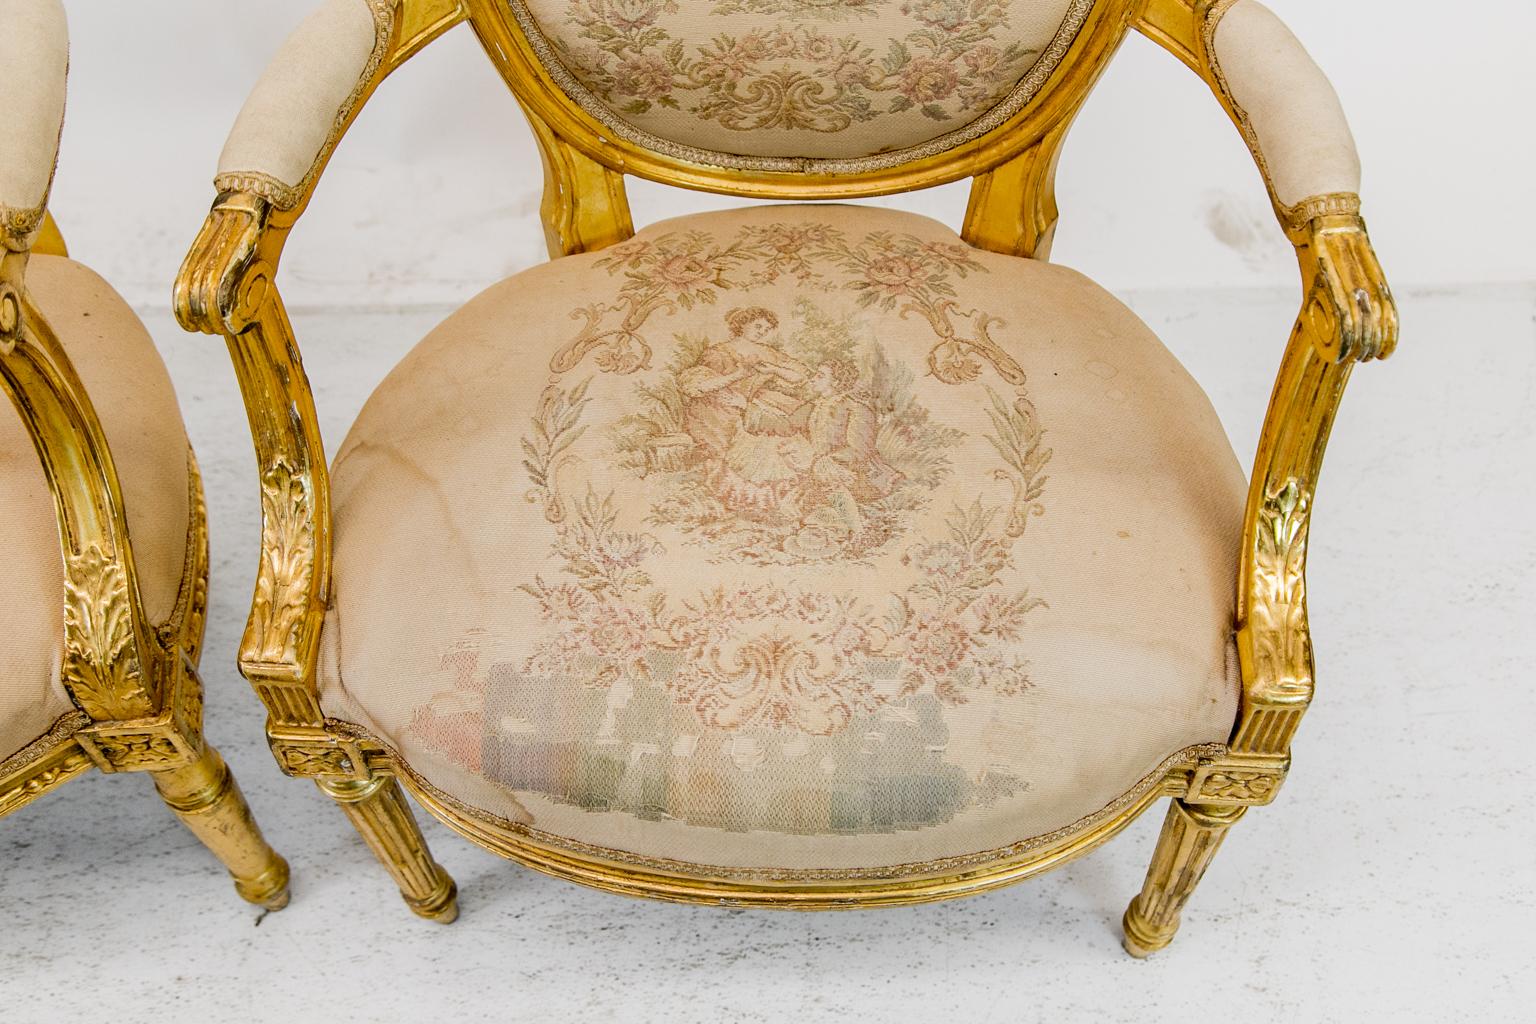 The fabric on this near pair of French gilt armchairs depicts courting scenes. There is significant wear and staining to the fabric and wear to the gilding in some areas. The oval backs have carved molded shapes and splayed arms have carved acanthus